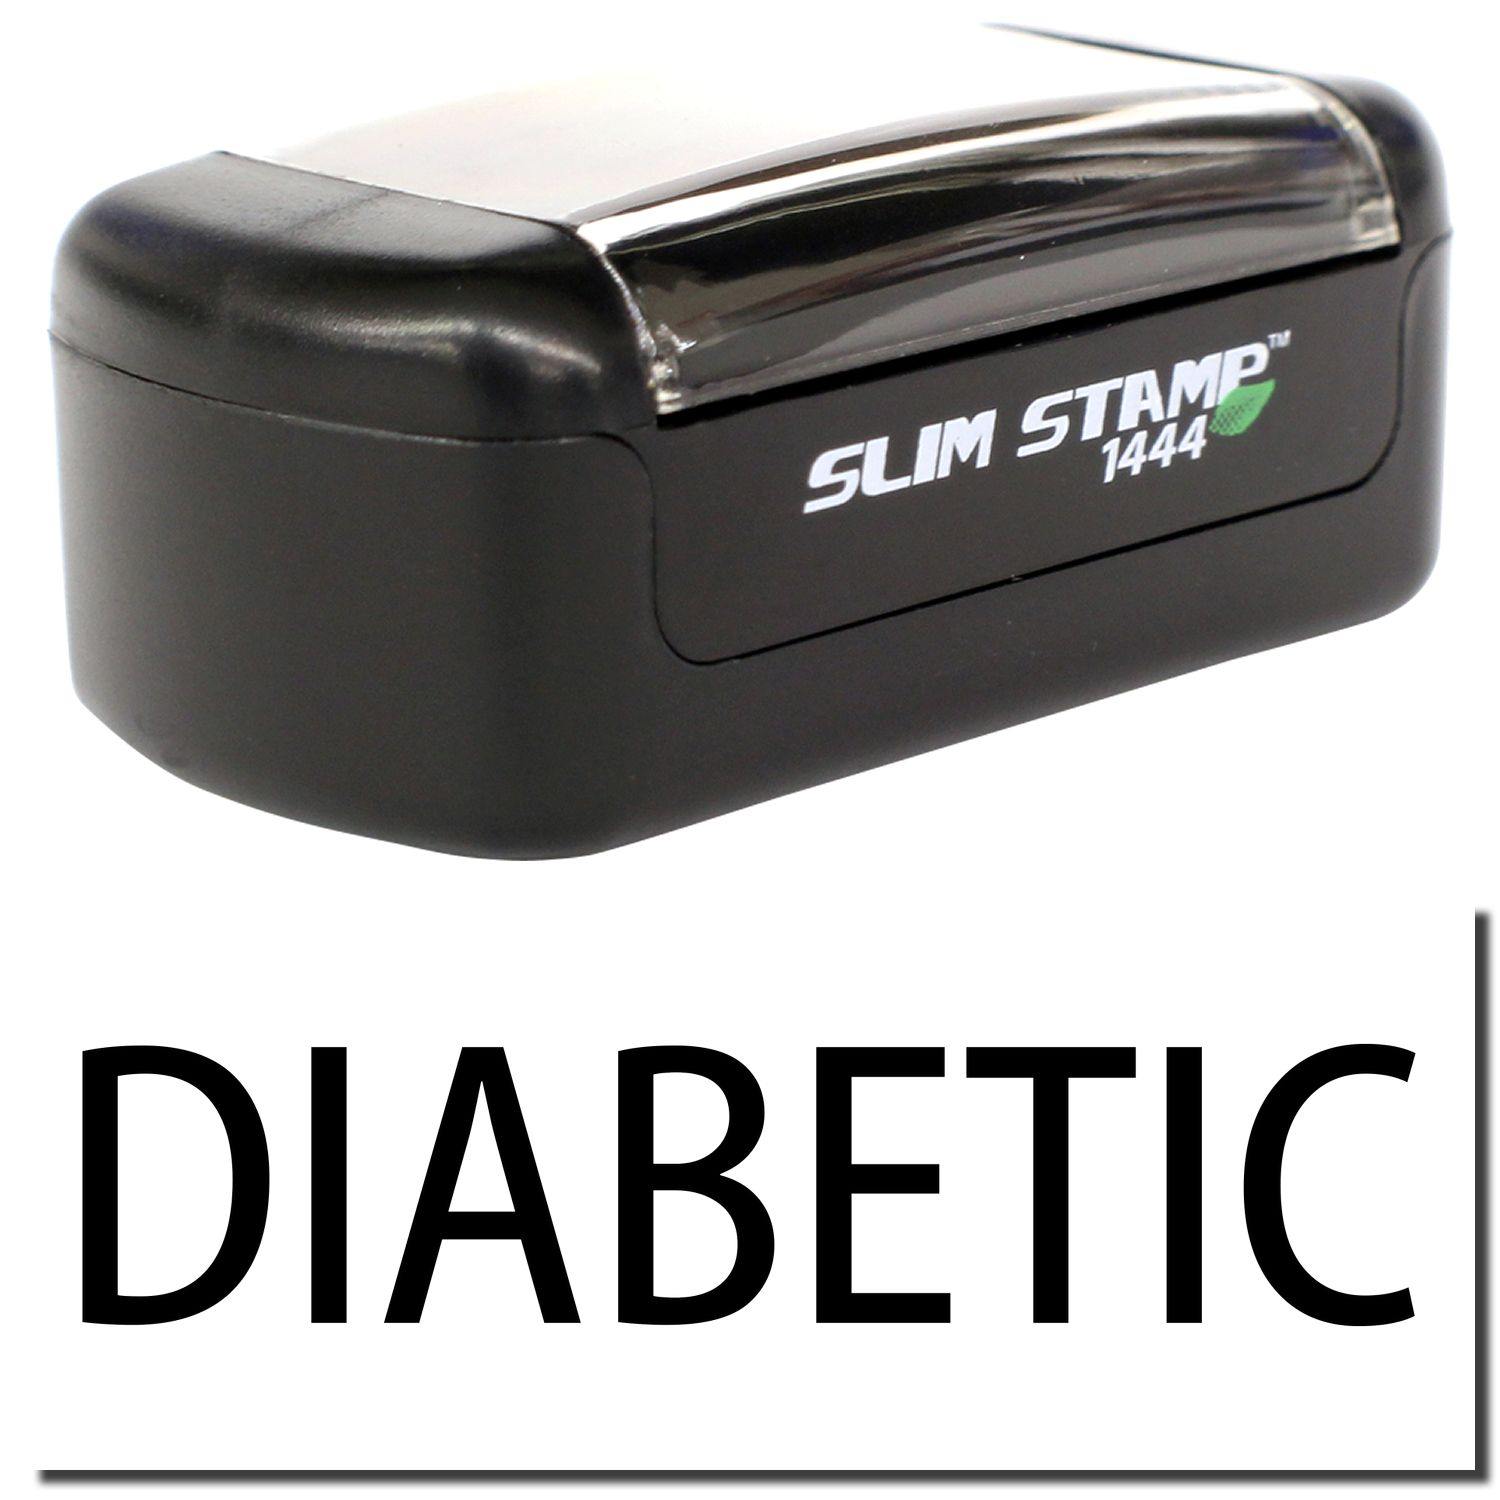 A stock office pre-inked stamp with a stamped image showing how the text "DIABETIC" is displayed after stamping.